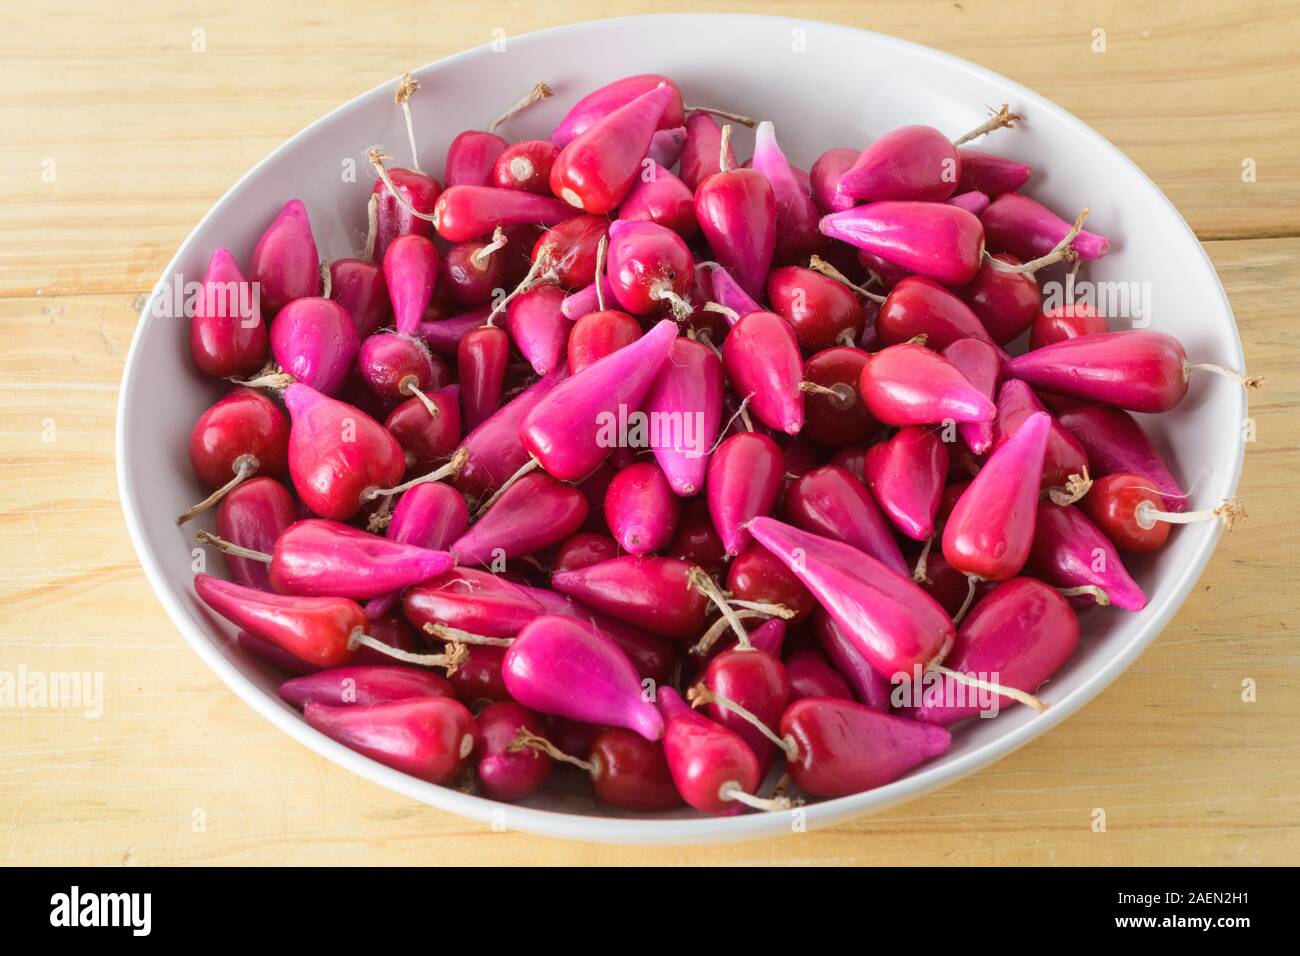 Fresh Pitiguey pink fruit group in white bowl on wood table. Stock Photo